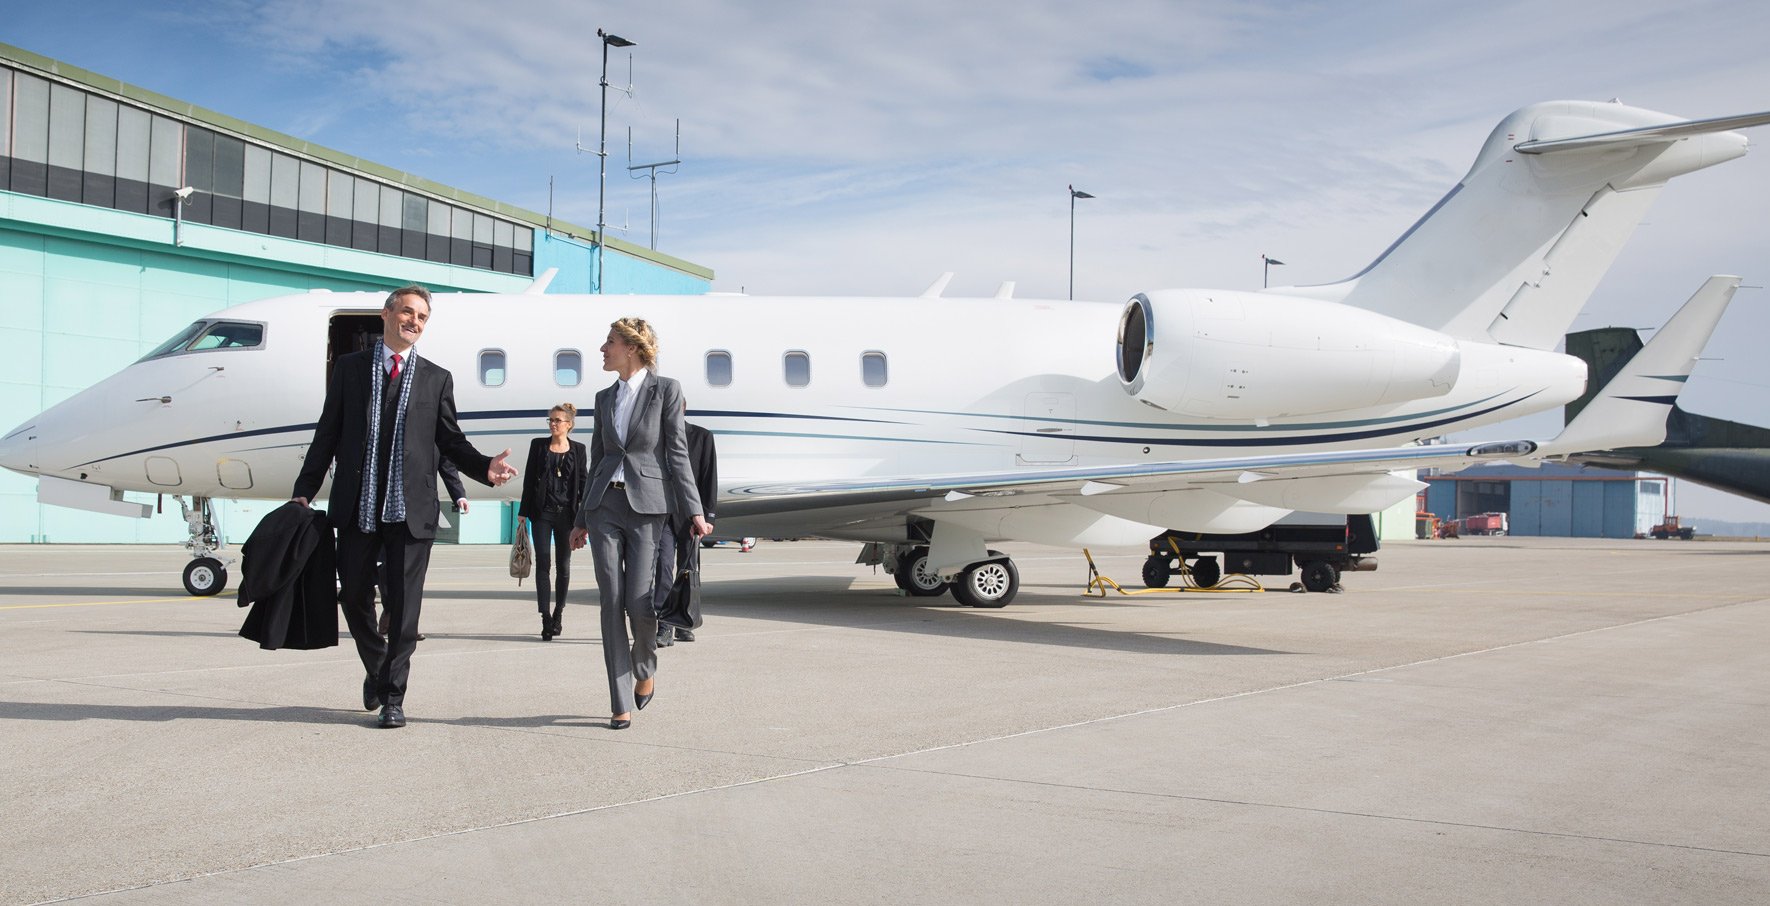 Businesspeople departing private jet